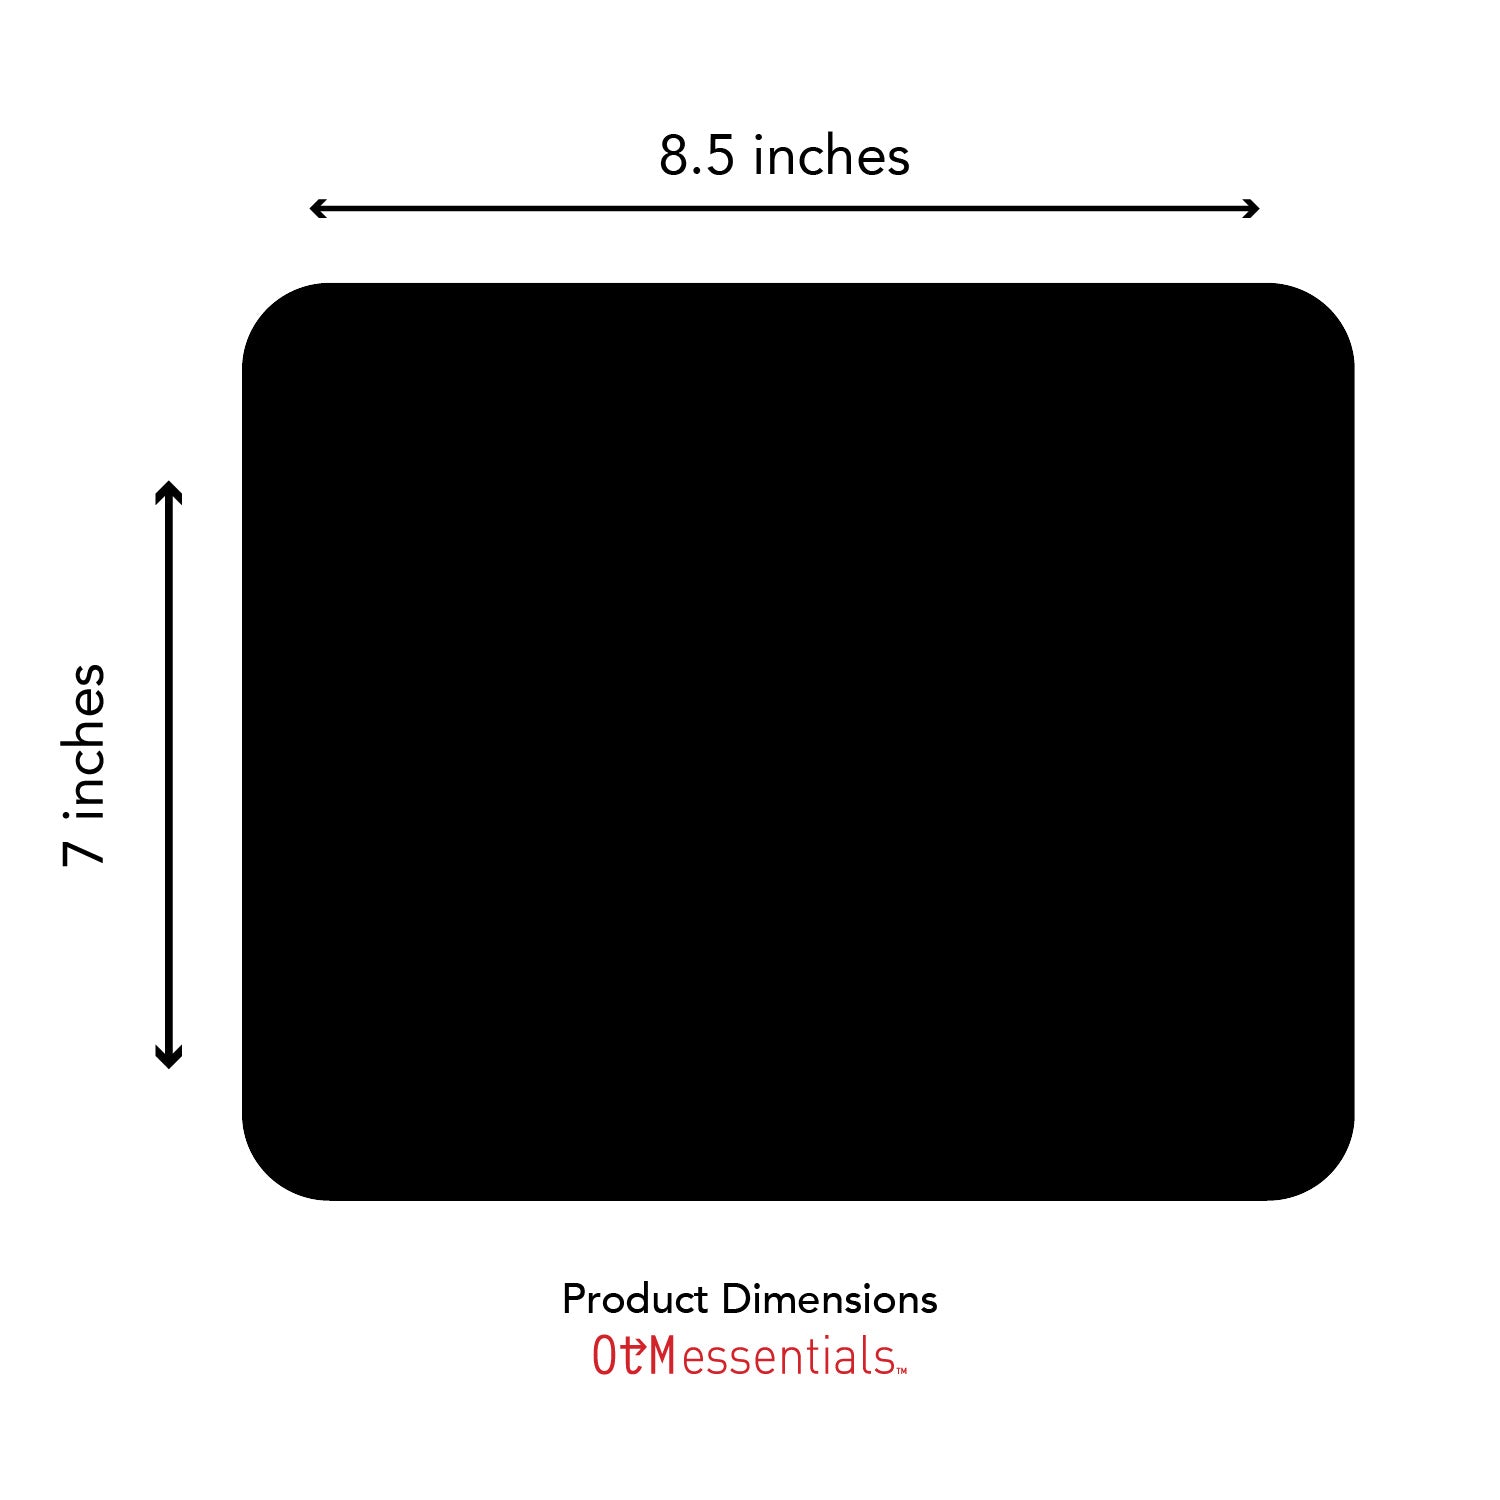 OC-USC4-MH38A, Product Dimensions